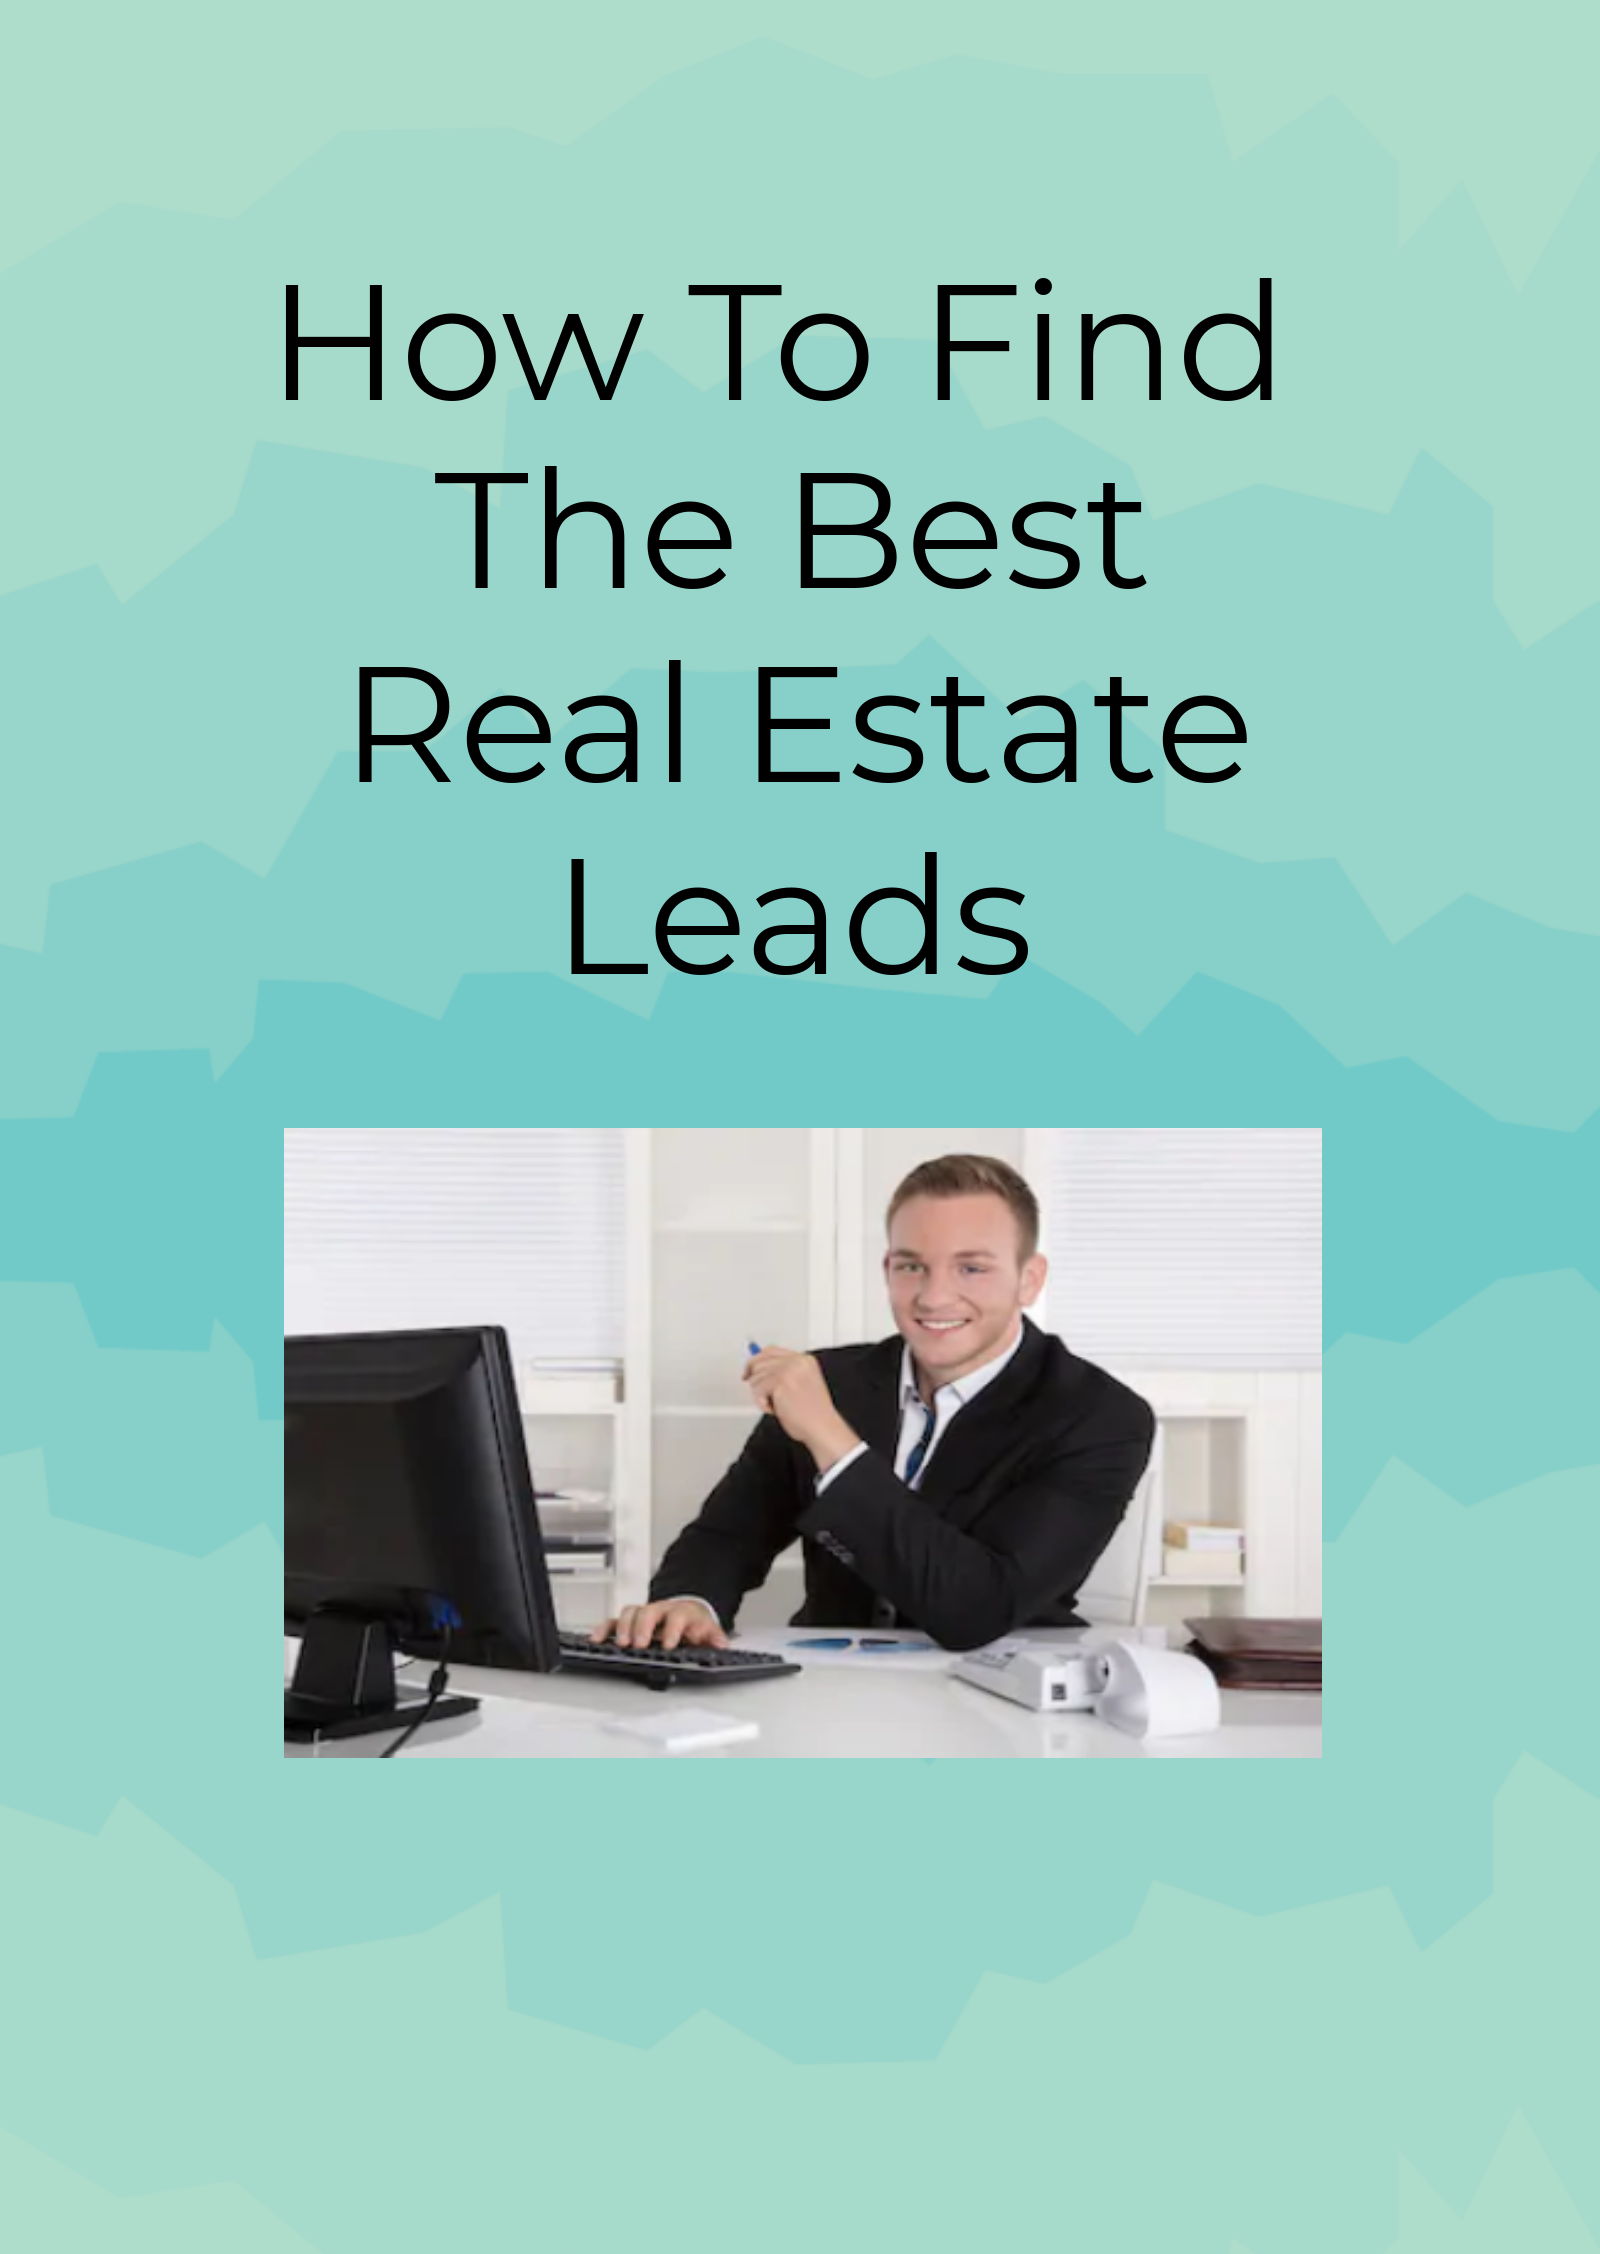 What are the best real estate sites to obtain leads from